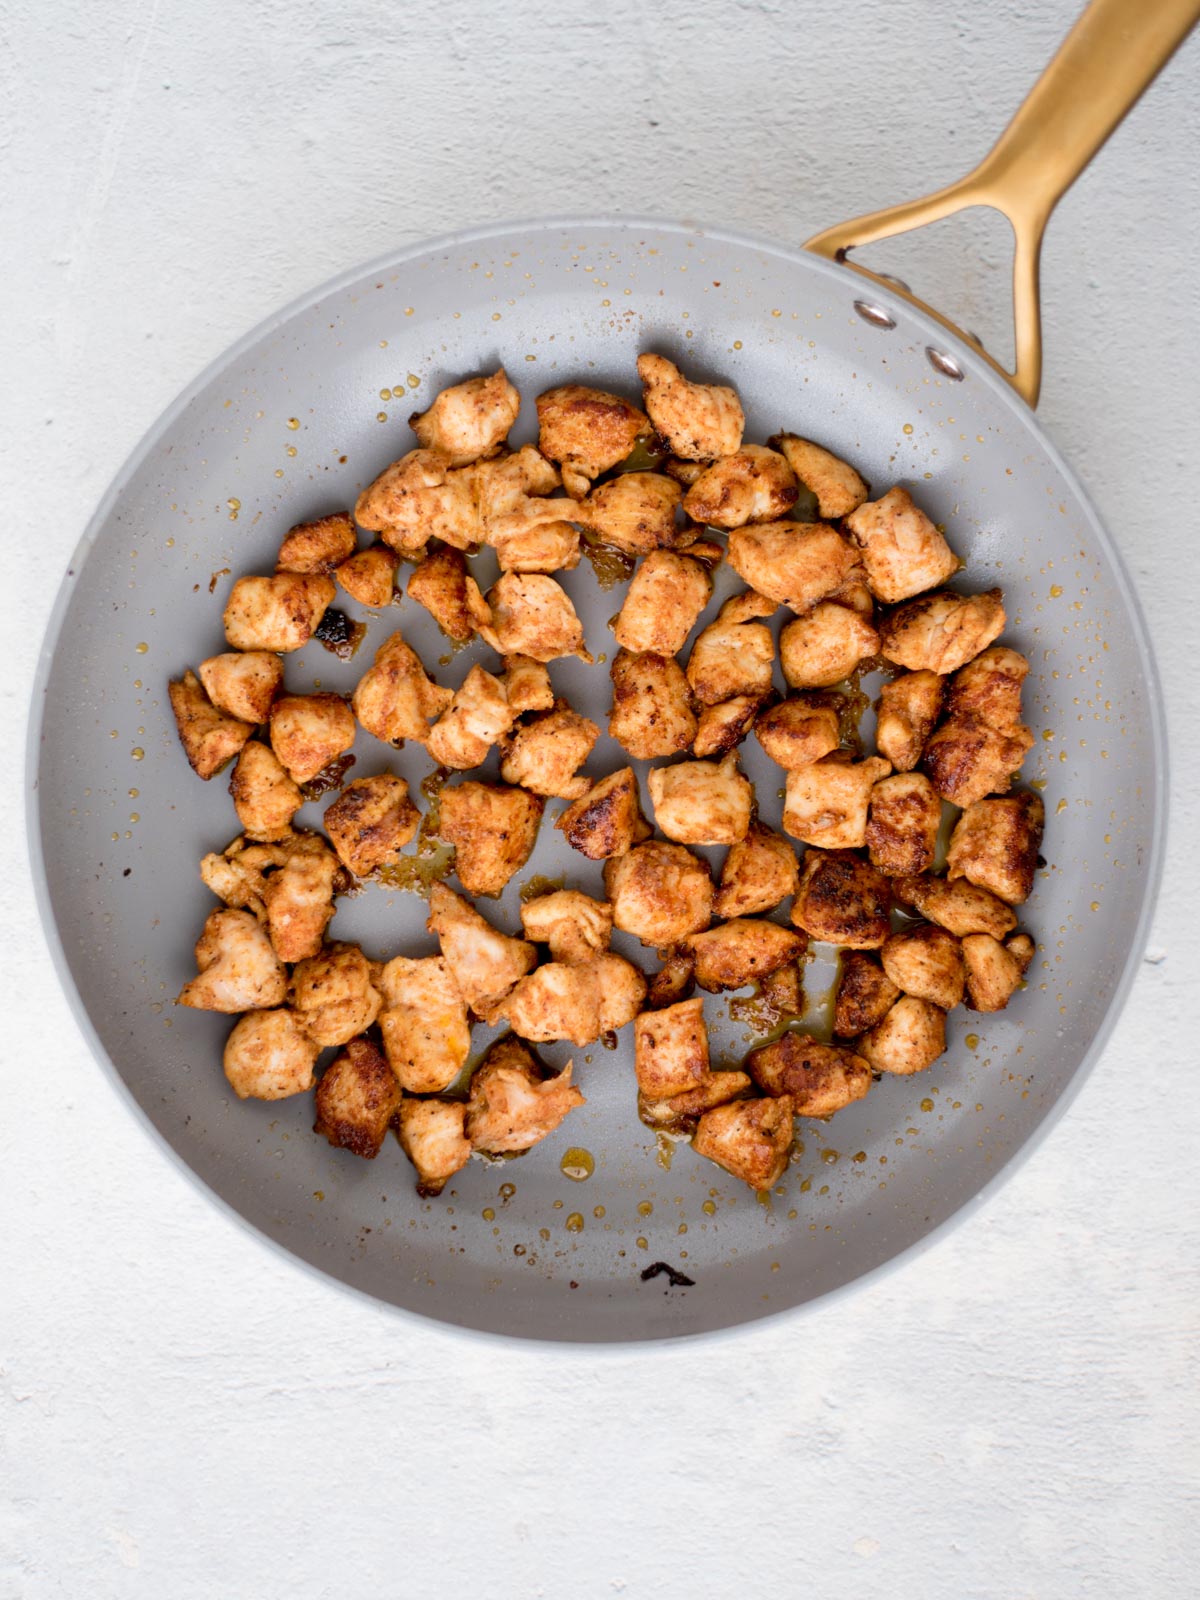 Chicken pieces sauted to a golden brown in a skillet.